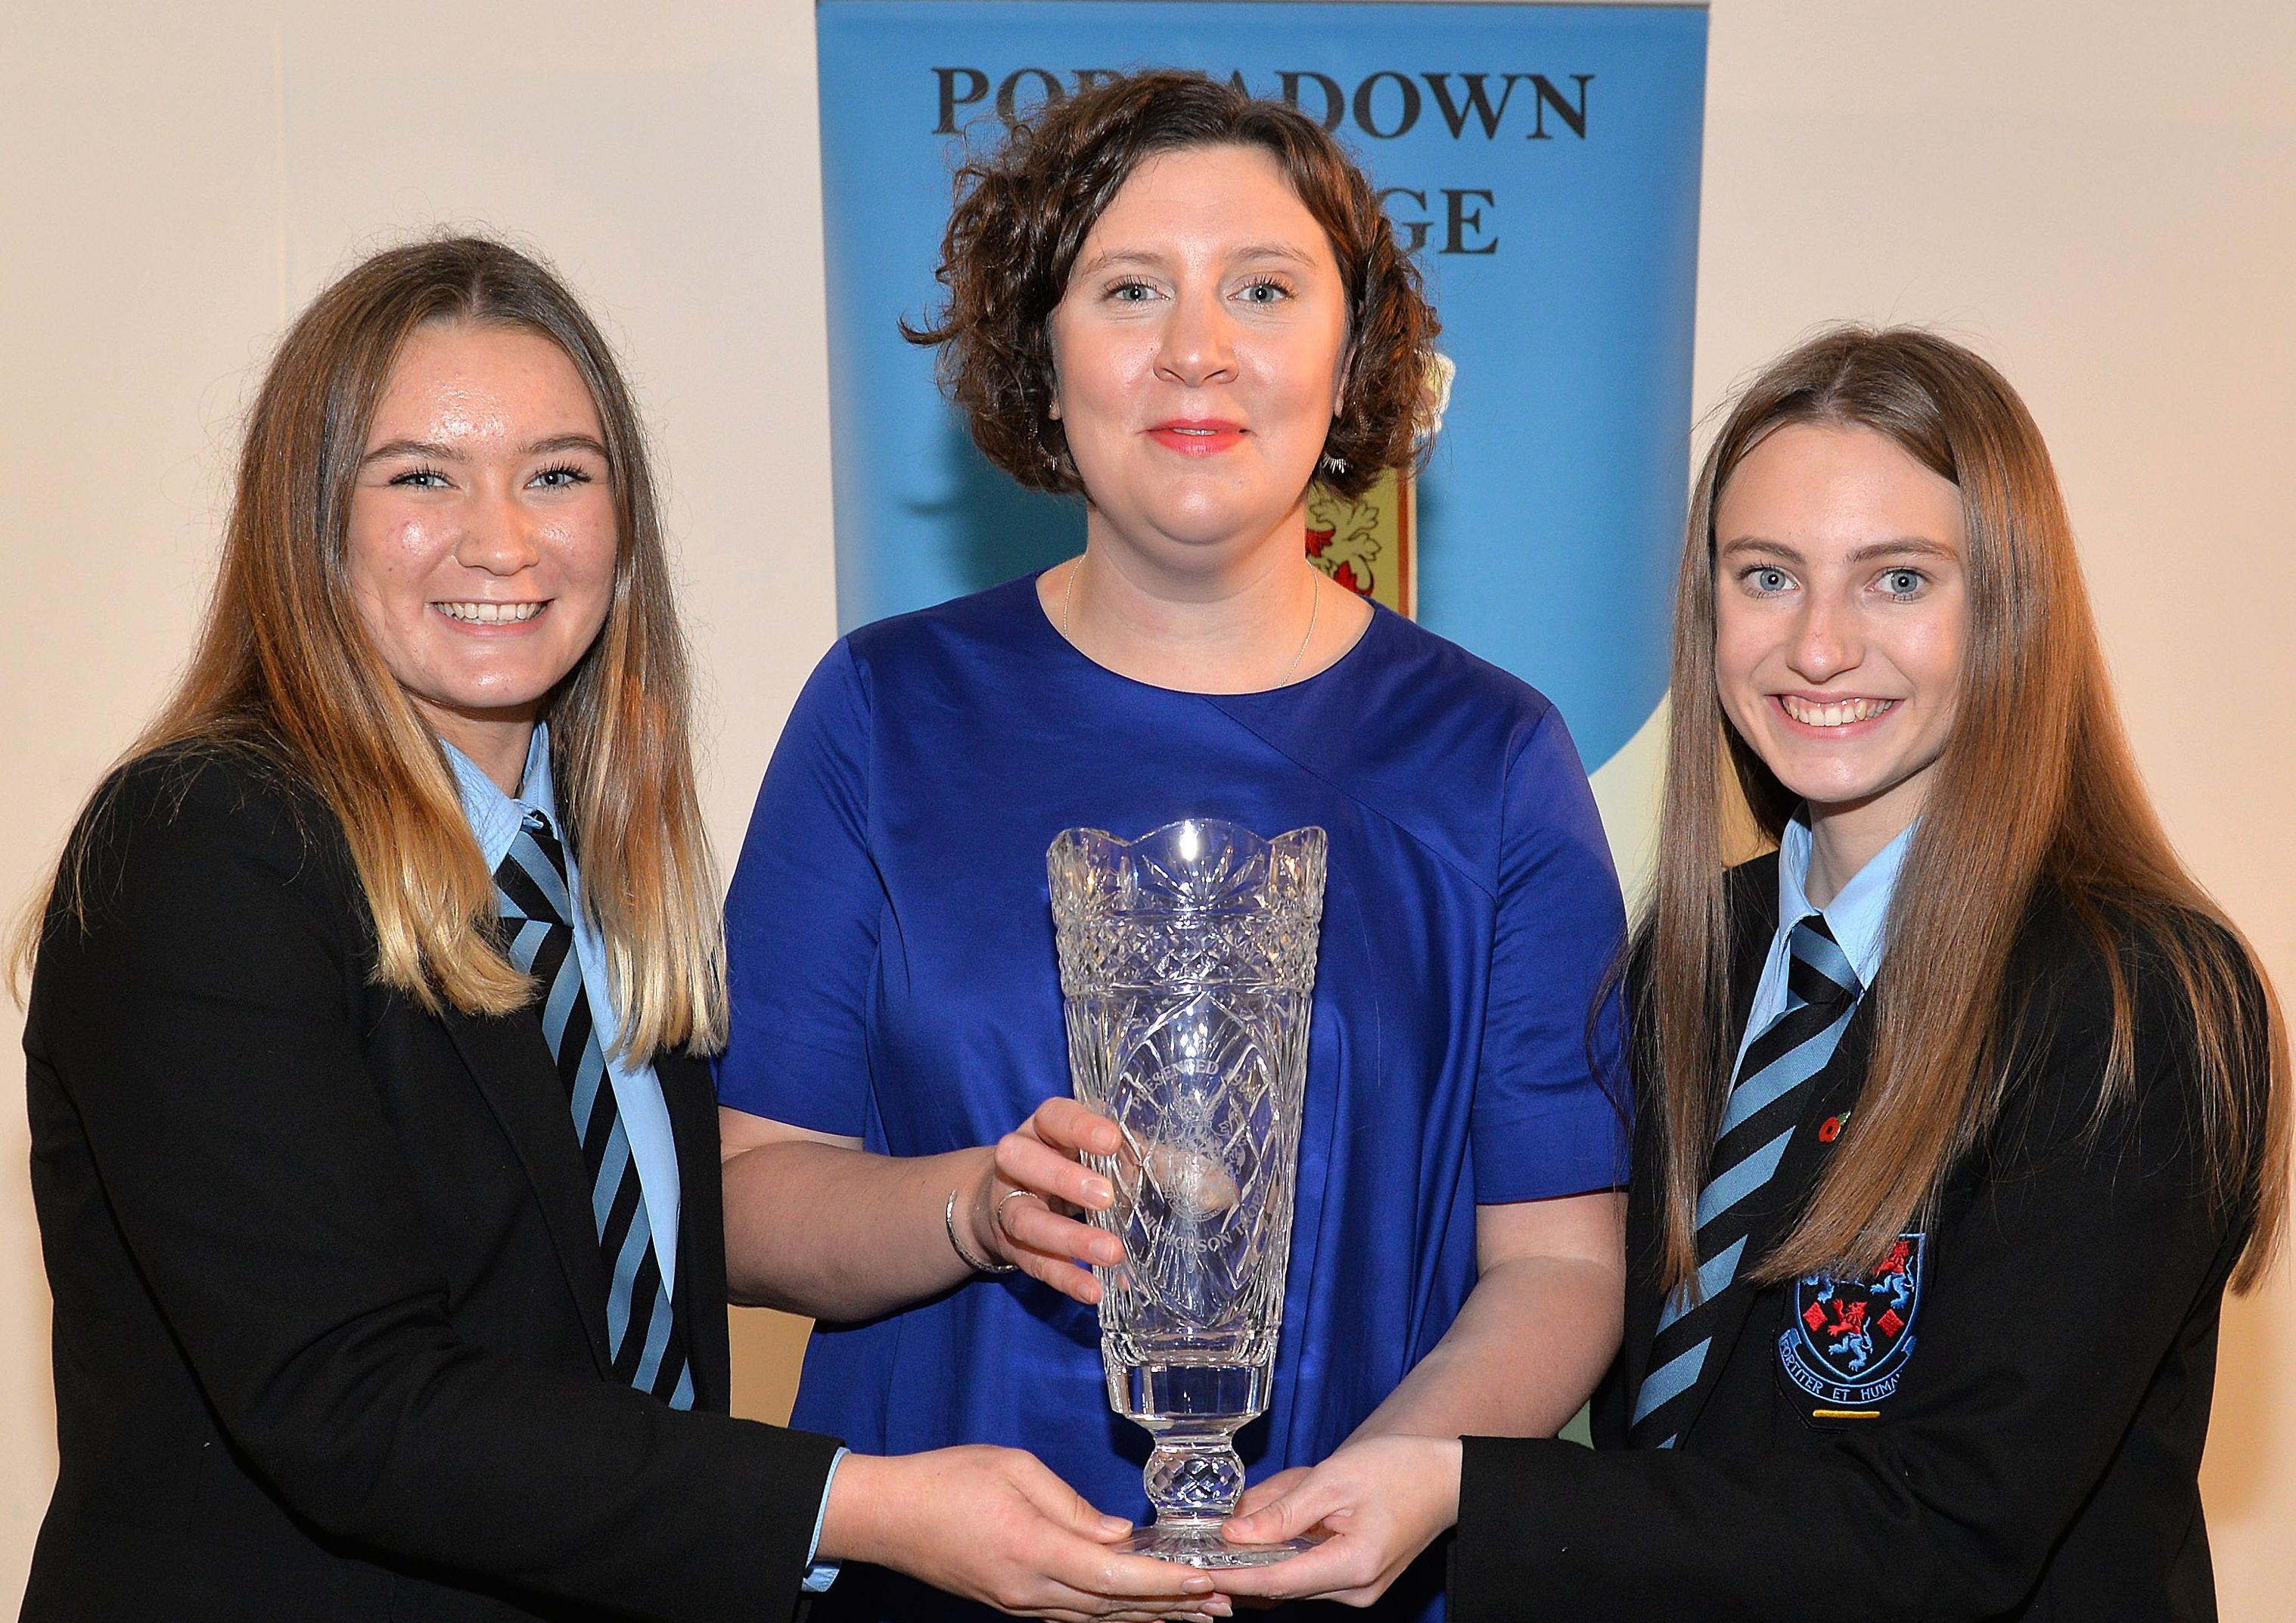 Portadown College pupils, Cassia Herron, left, and Ellen Wilson jointly receive the Nicholson Trophy for the best achievement at GCSE from special Guest, Shelley Brownlee at the school Speech Day. INPT44-215.